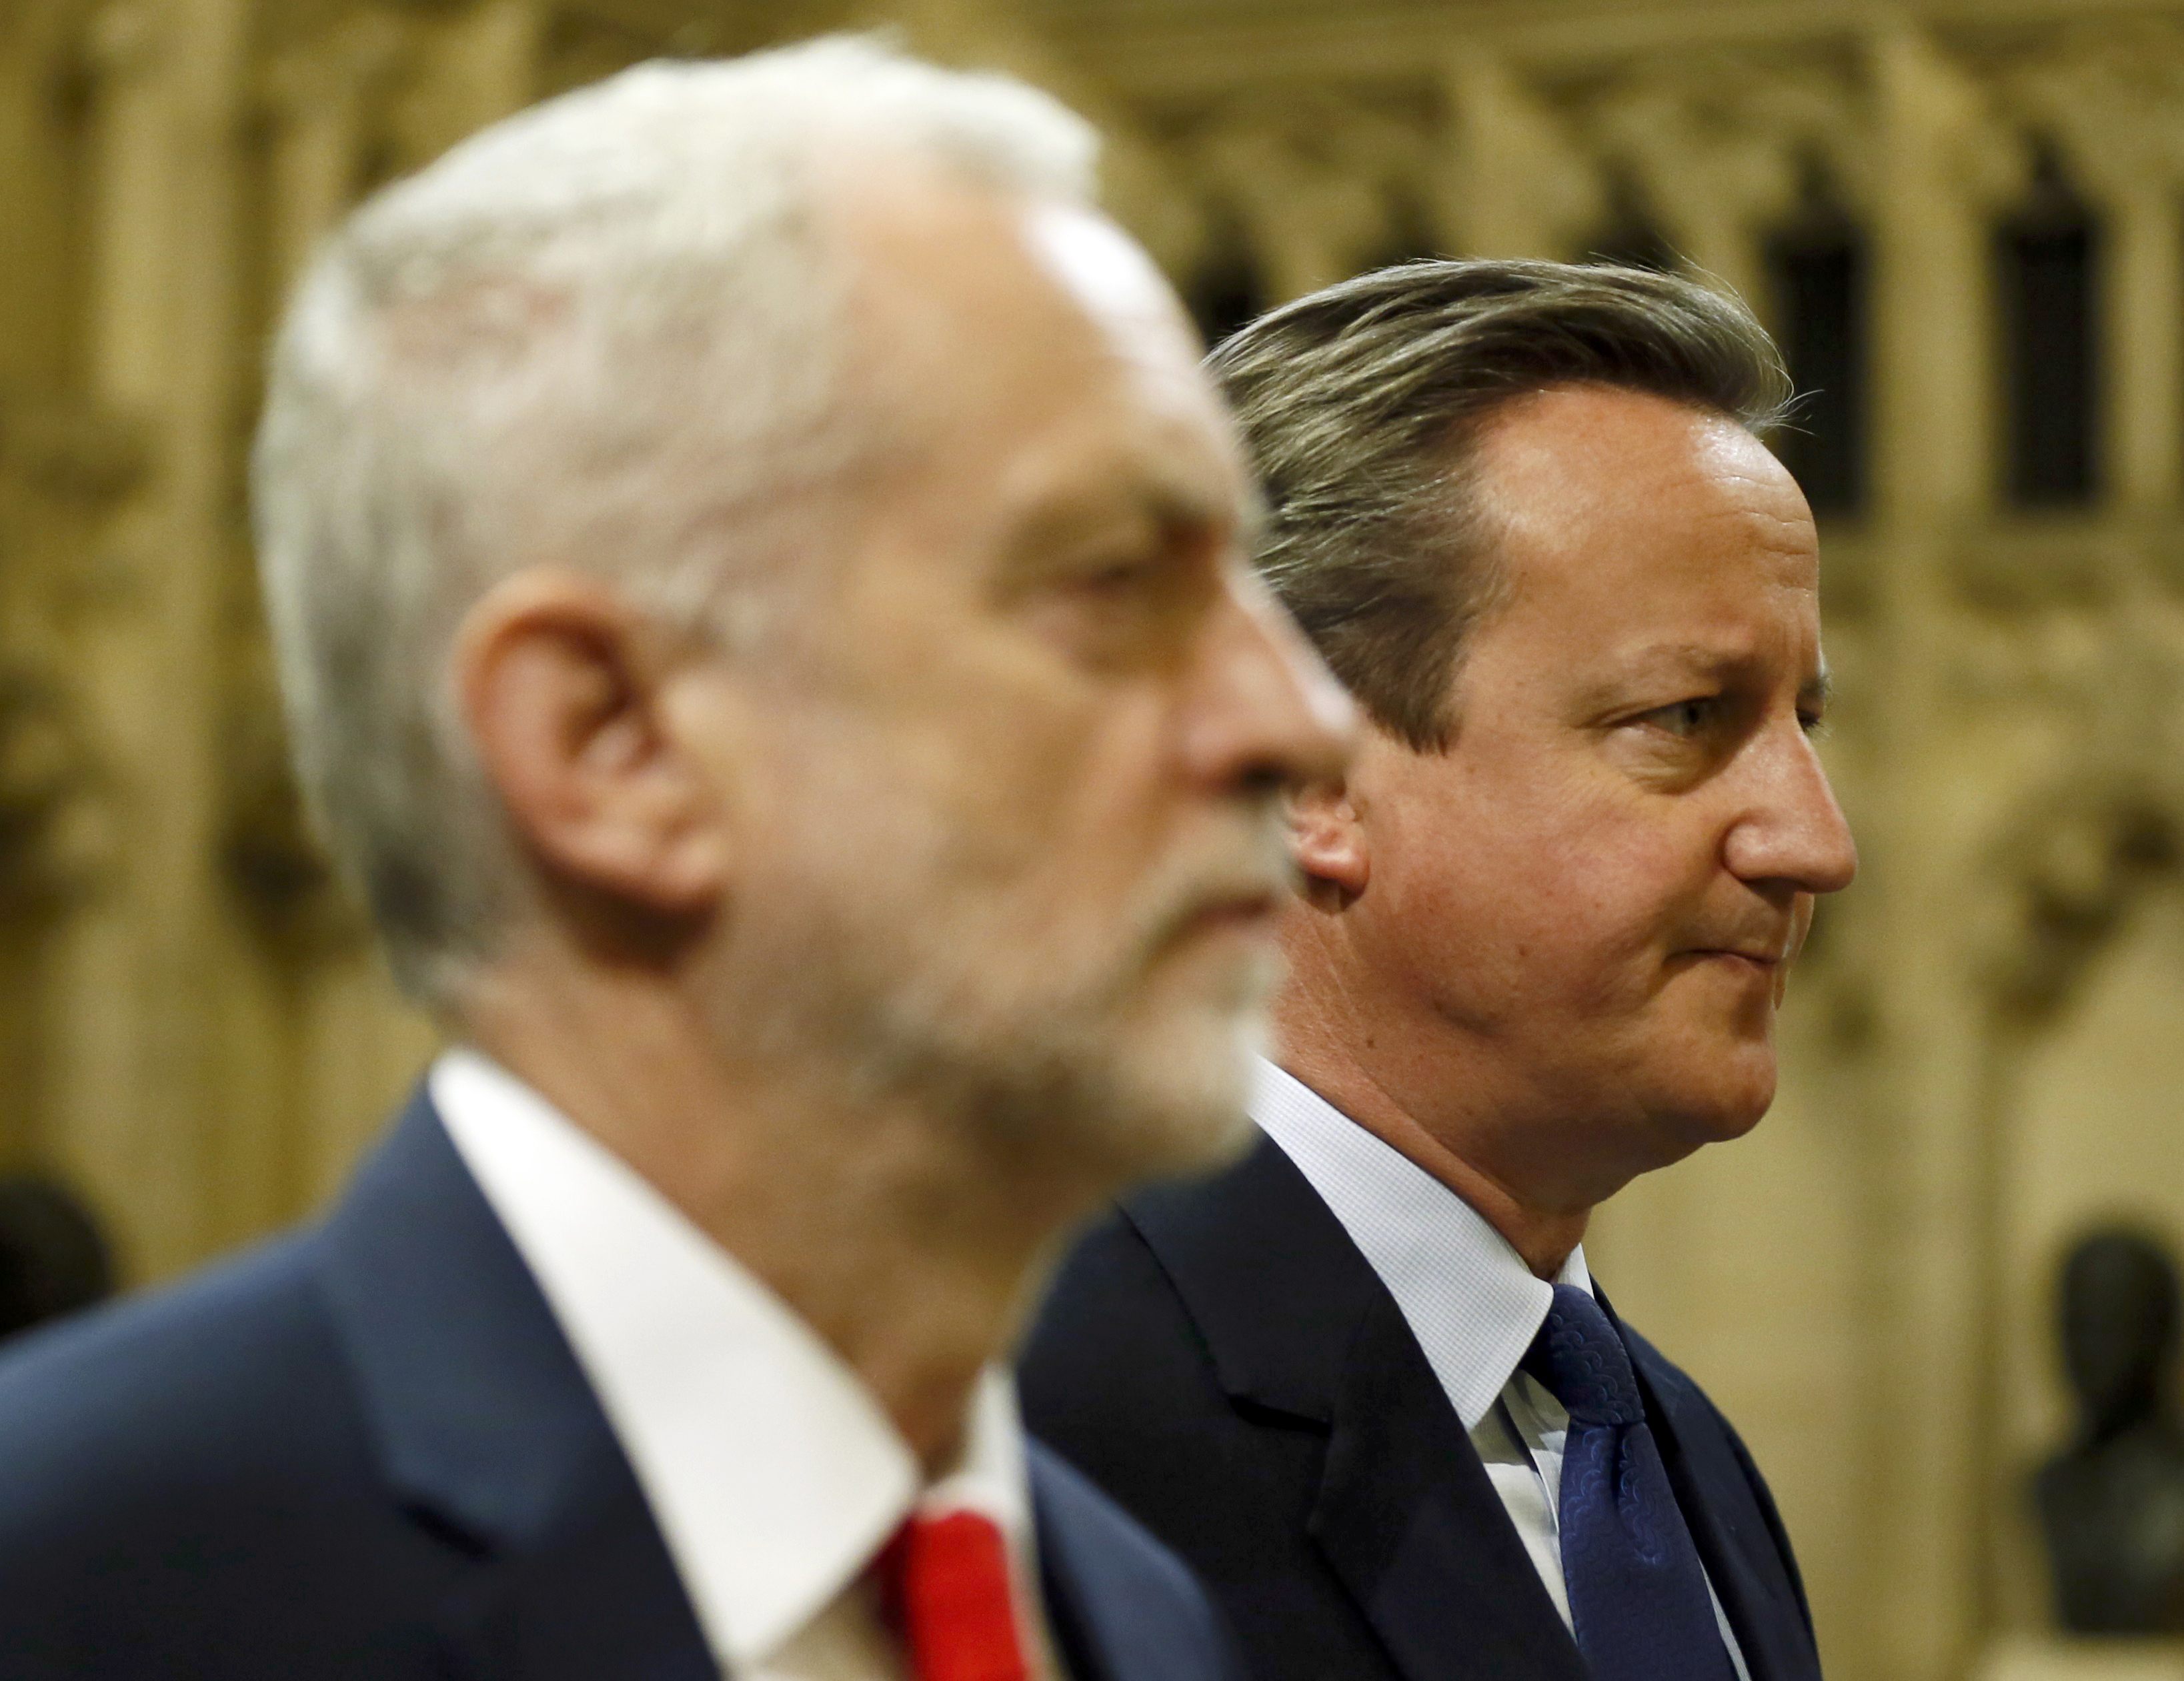 Prime Minister David Cameron (R) and Labour Party leader Jeremy Corbyn